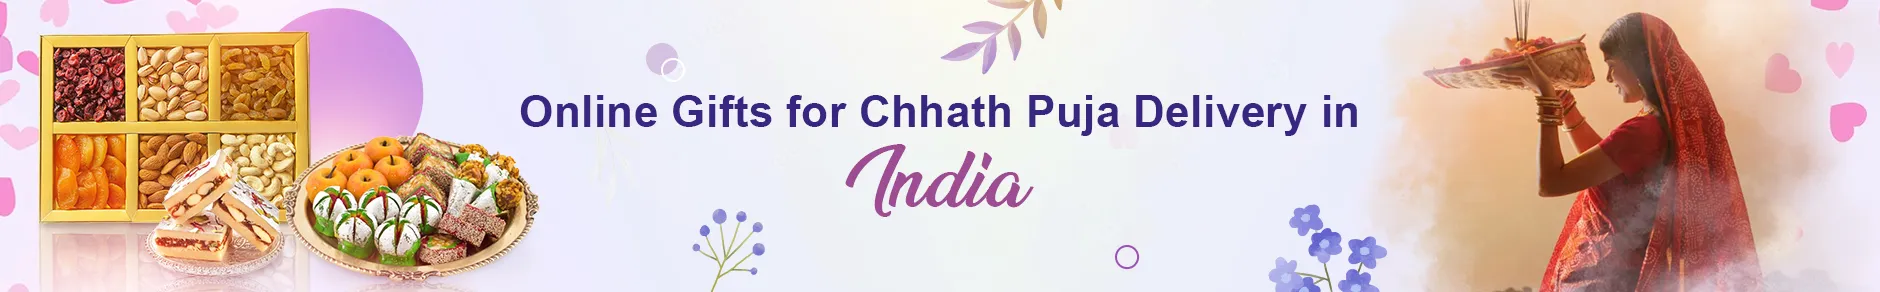 Chhath Puja Gifts